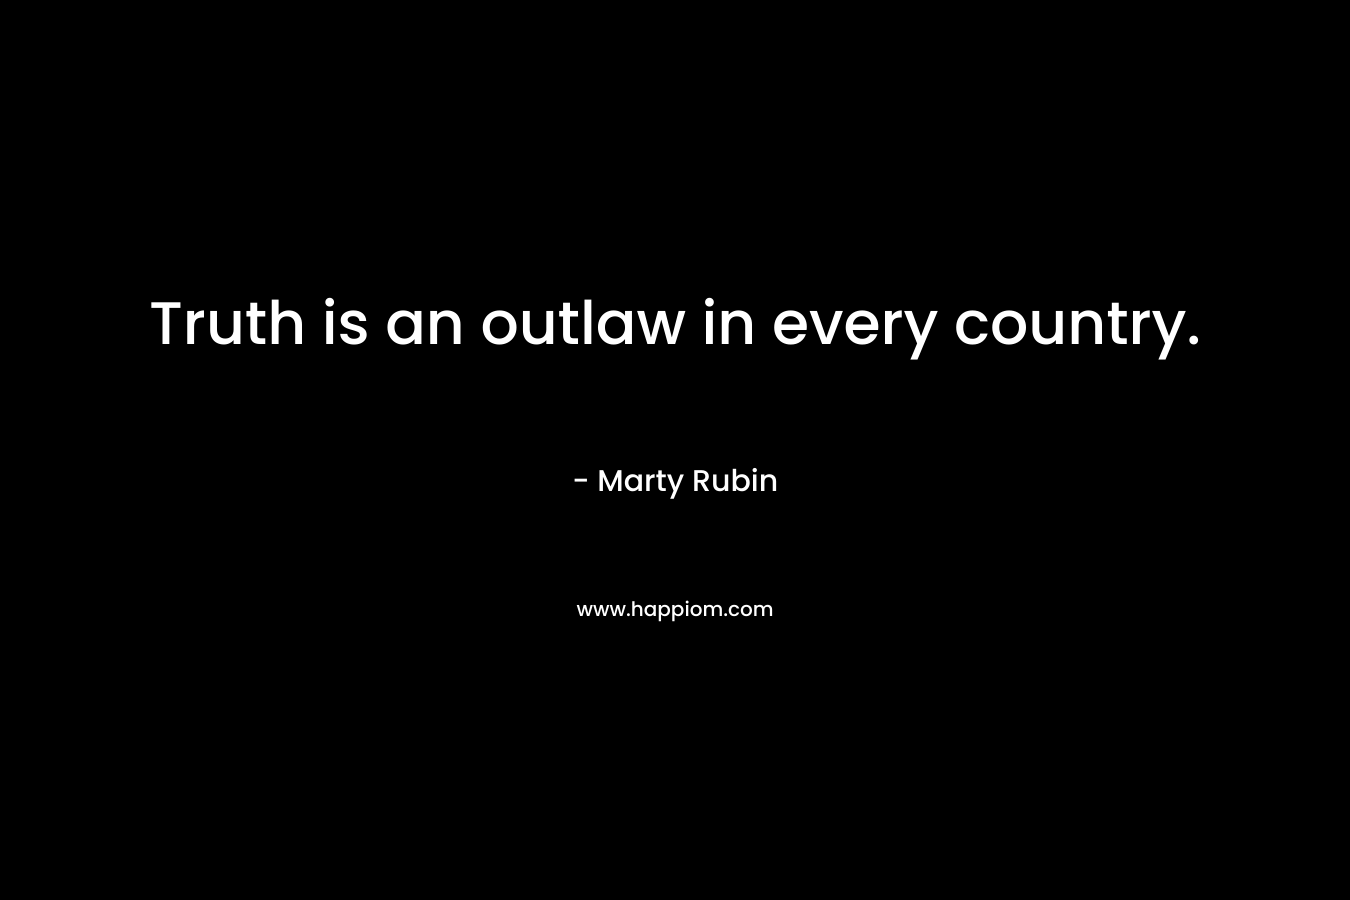 Truth is an outlaw in every country.